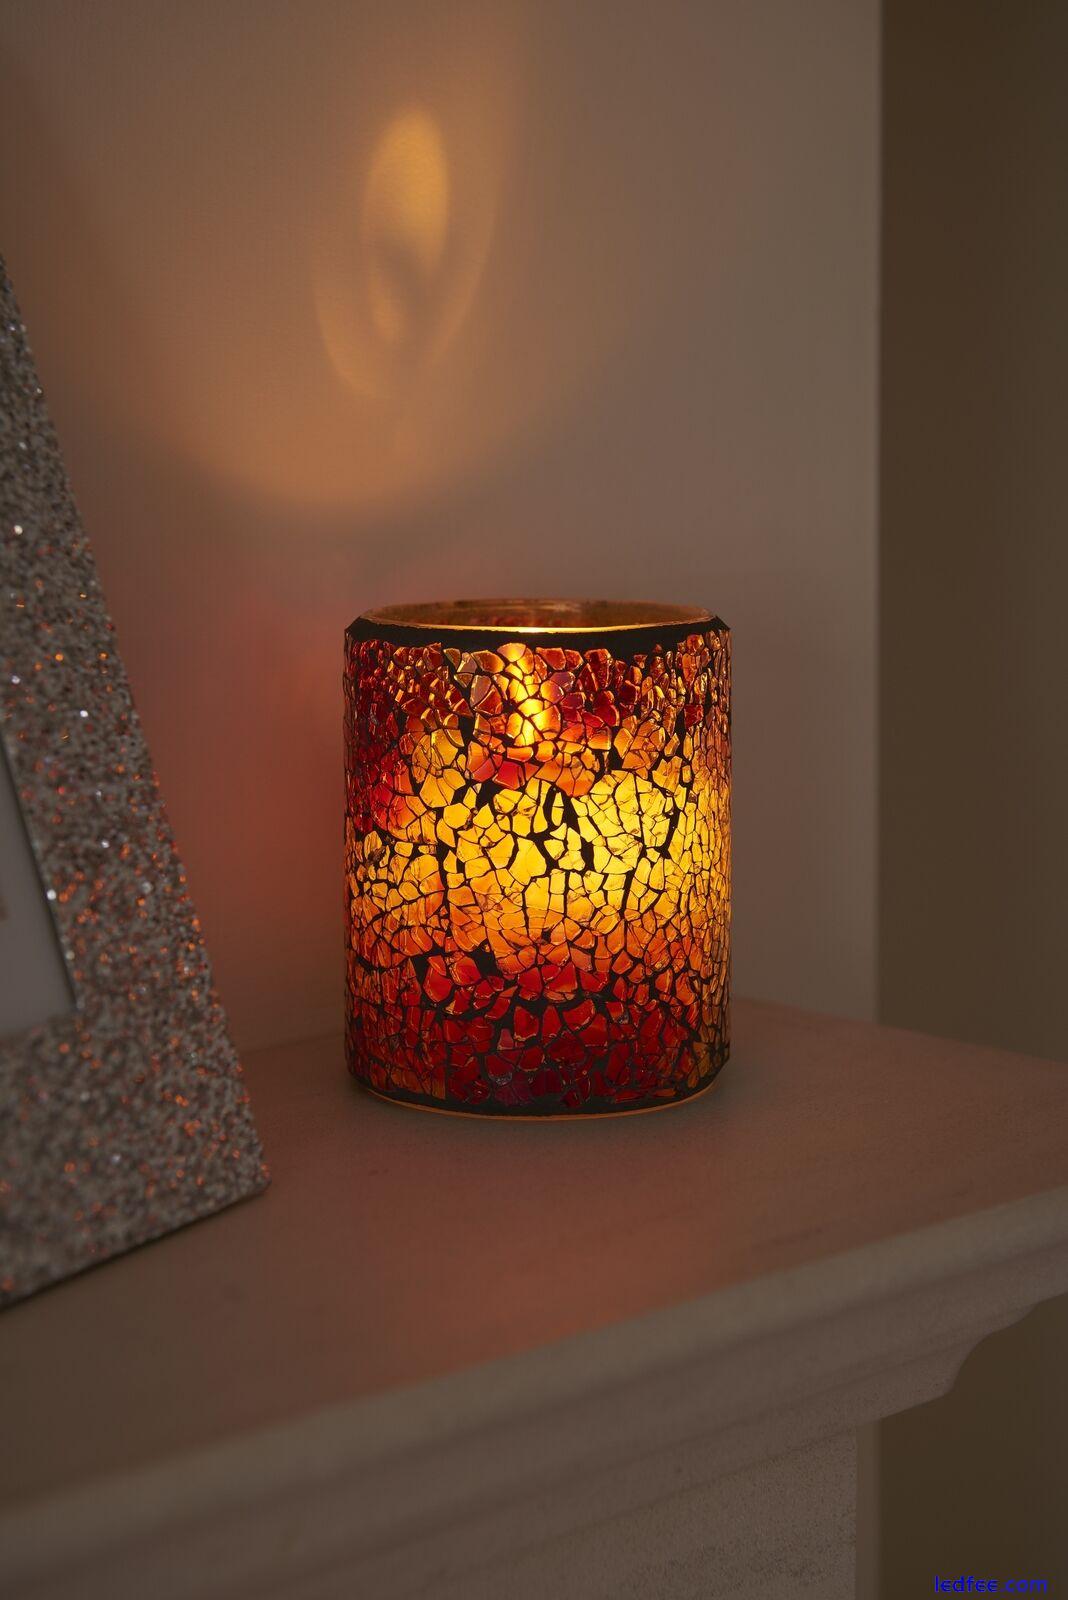 Auraglow Mosaic Glass Flickering Flameless LED Decorative Candle Safety Flame 0 